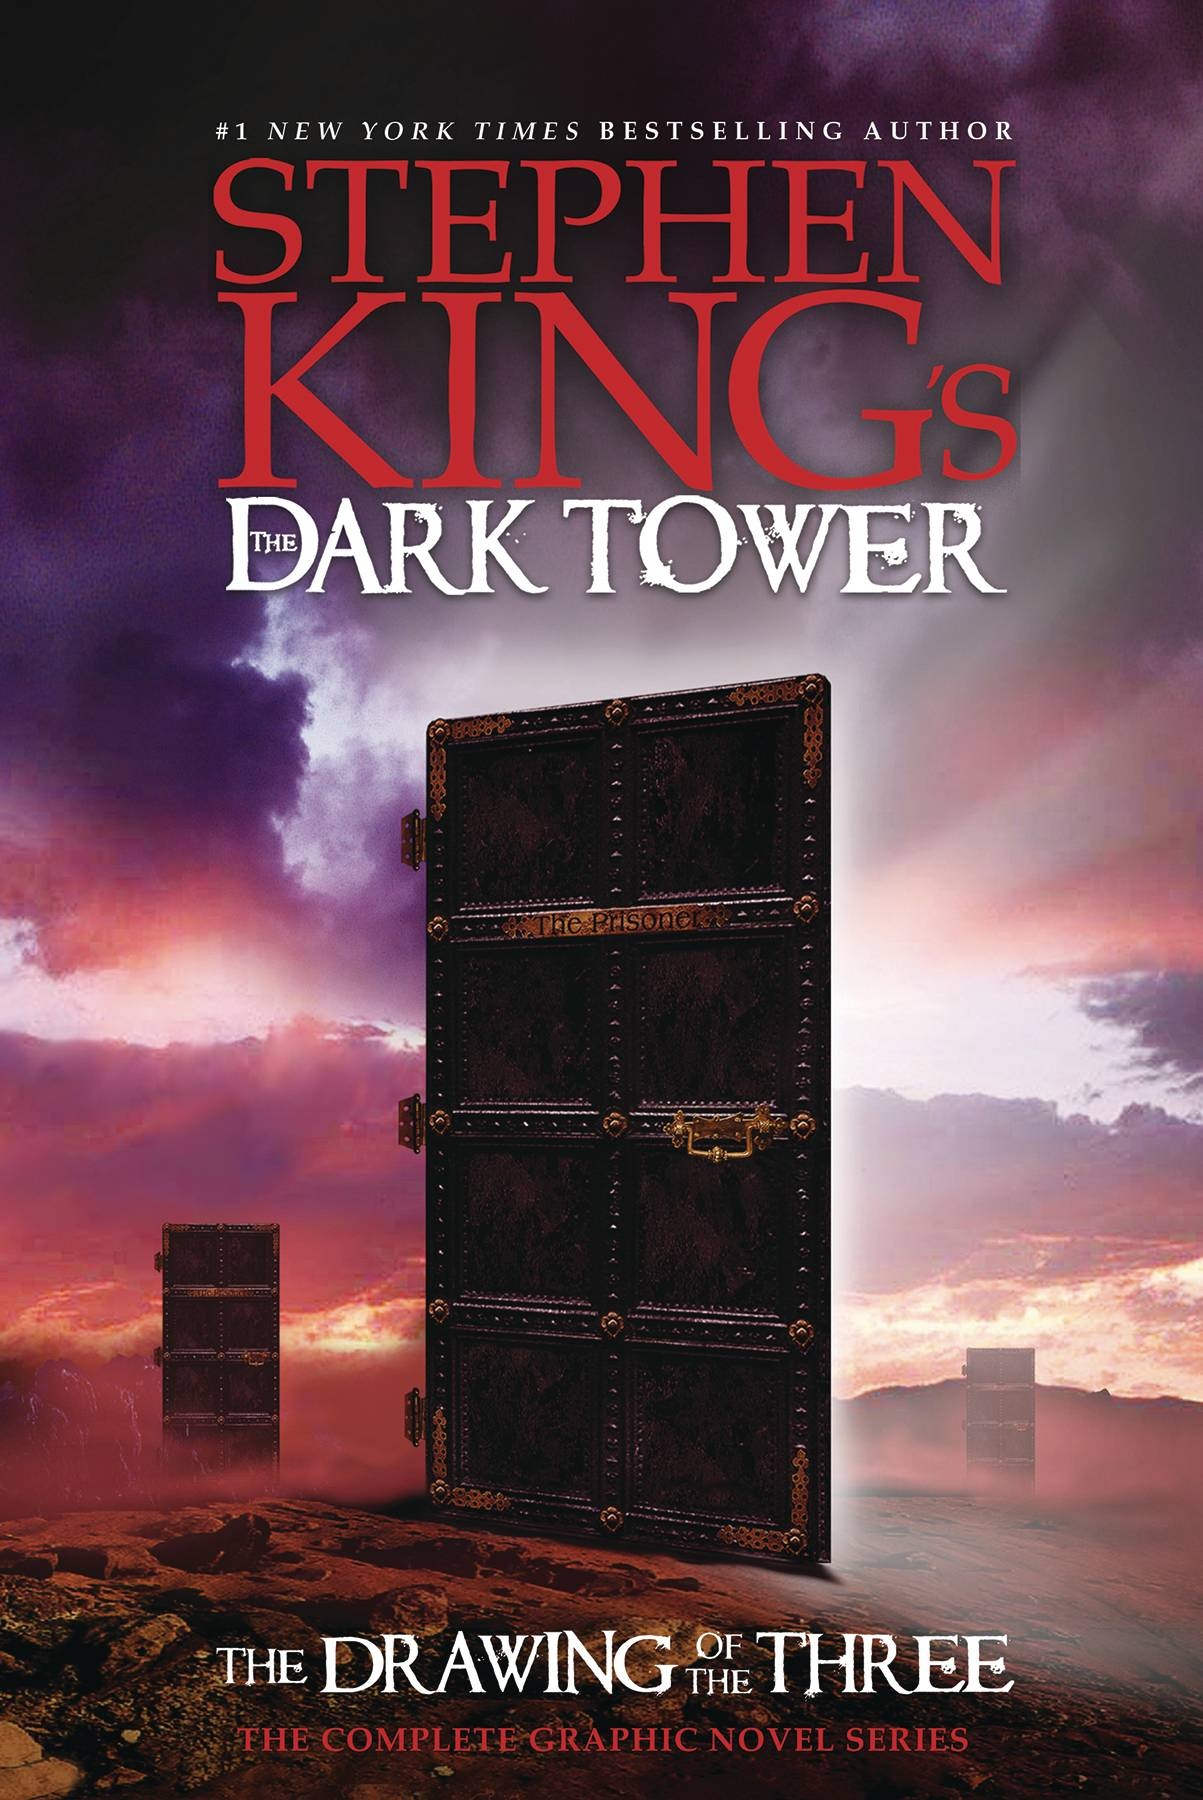 DARK TOWER (STEPHEN KING's) OMNIBUS VOL 03 THE DRAWING OF THE THREE HC